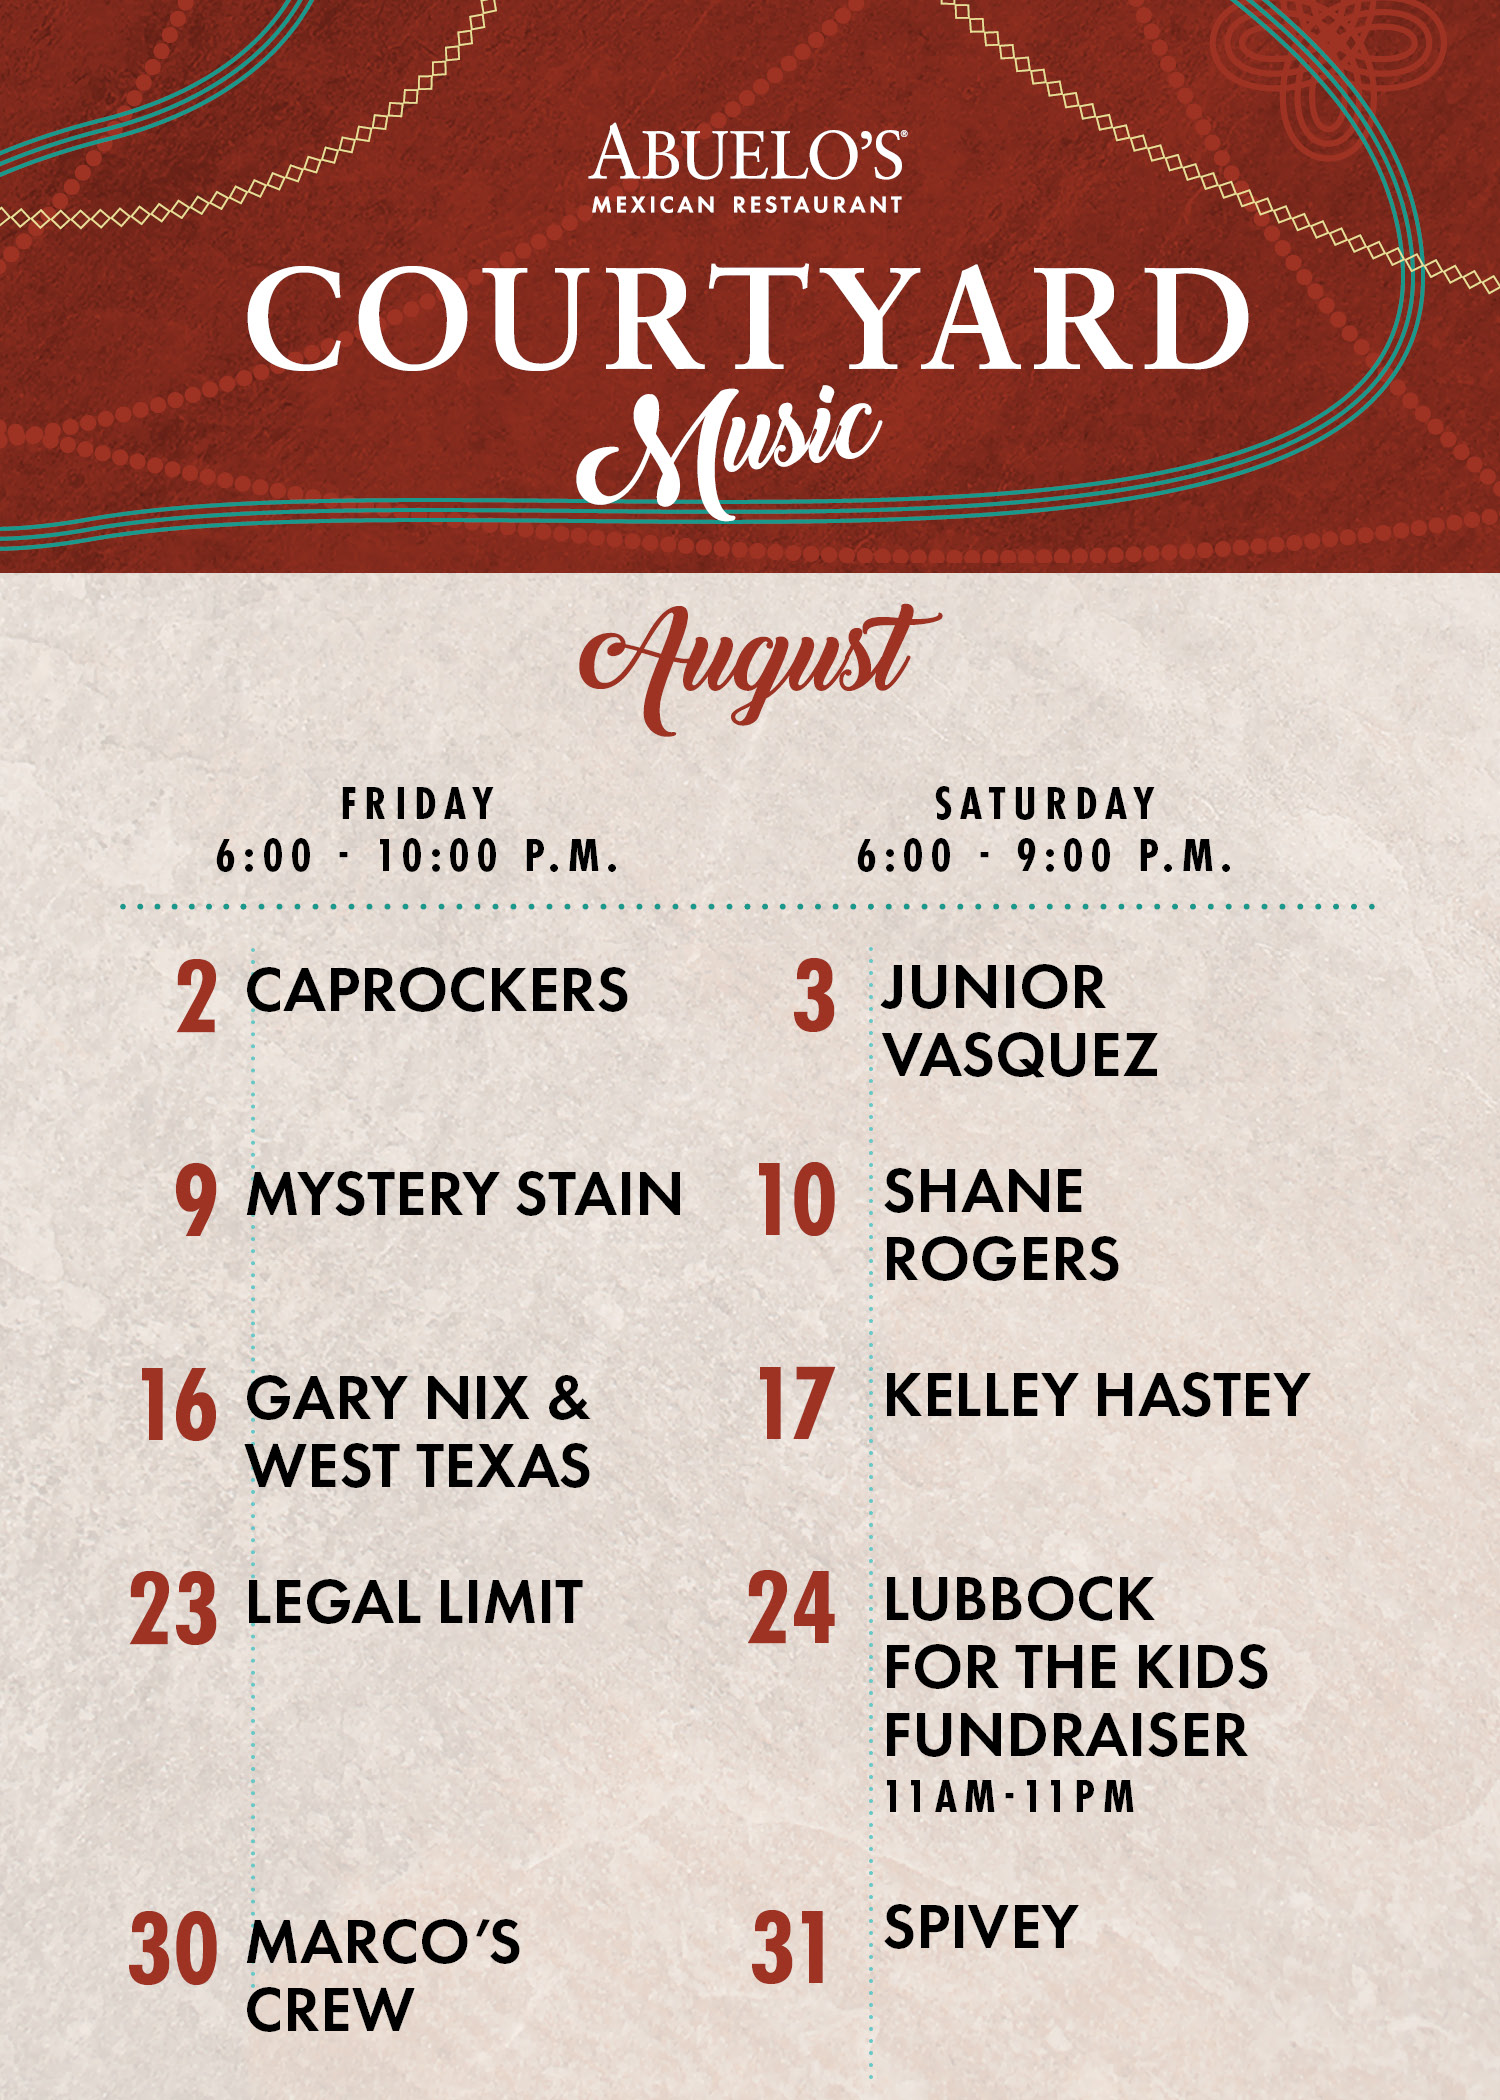 Abuelo's Live Music in the Courtyard, August schedule.